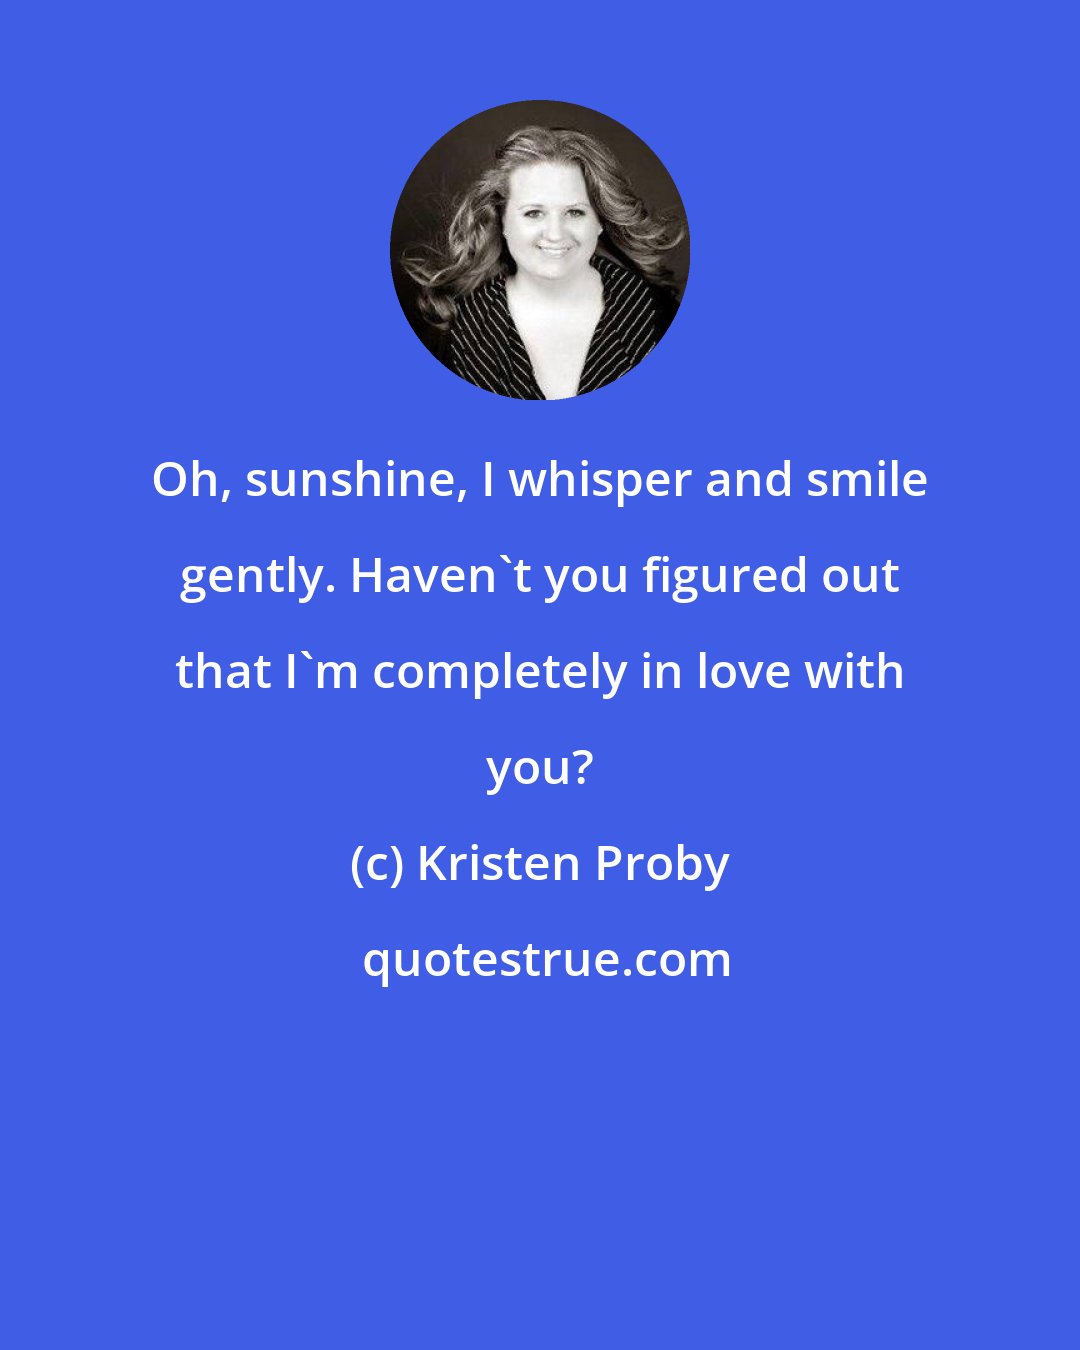 Kristen Proby: Oh, sunshine, I whisper and smile gently. Haven't you figured out that I'm completely in love with you?